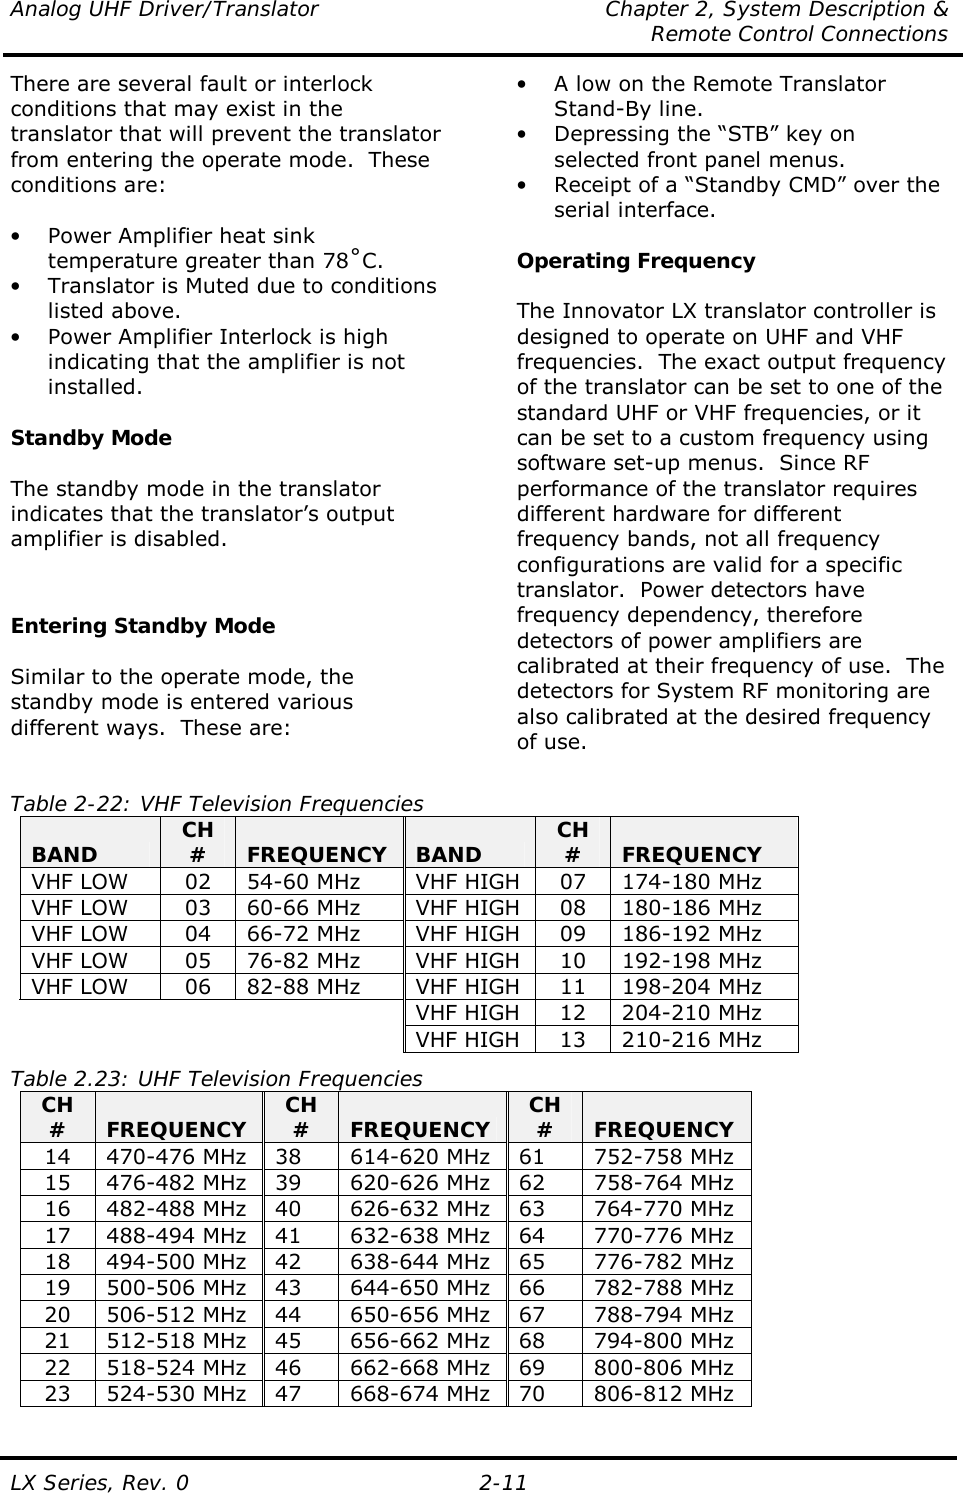 Analog UHF Driver/Translator  Chapter 2, System Description &amp;   Remote Control Connections LX Series, Rev. 0  2-11 There are several fault or interlock conditions that may exist in the translator that will prevent the translator from entering the operate mode.  These conditions are:  •  Power Amplifier heat sink temperature greater than 78ûC. •  Translator is Muted due to conditions listed above. •  Power Amplifier Interlock is high indicating that the amplifier is not installed.  Standby Mode  The standby mode in the translator indicates that the translator’s output amplifier is disabled.    Entering Standby Mode  Similar to the operate mode, the standby mode is entered various different ways.  These are:  •  A low on the Remote Translator Stand-By line. •  Depressing the “STB” key on selected front panel menus. •  Receipt of a “Standby CMD” over the serial interface.  Operating Frequency  The Innovator LX translator controller is designed to operate on UHF and VHF frequencies.  The exact output frequency of the translator can be set to one of the standard UHF or VHF frequencies, or it can be set to a custom frequency using software set-up menus.  Since RF performance of the translator requires different hardware for different frequency bands, not all frequency configurations are valid for a specific translator.  Power detectors have frequency dependency, therefore detectors of power amplifiers are calibrated at their frequency of use.  The detectors for System RF monitoring are also calibrated at the desired frequency of use.  Table 2-22: VHF Television Frequencies BAND  CH #  FREQUENCY  BAND  CH #  FREQUENCY VHF LOW  02  54-60 MHz  VHF HIGH  07  174-180 MHz VHF LOW  03  60-66 MHz  VHF HIGH  08  180-186 MHz VHF LOW  04  66-72 MHz  VHF HIGH  09  186-192 MHz VHF LOW  05  76-82 MHz  VHF HIGH  10  192-198 MHz VHF LOW  06  82-88 MHz  VHF HIGH  11  198-204 MHz VHF HIGH  12  204-210 MHz  VHF HIGH  13  210-216 MHz Table 2.23: UHF Television Frequencies CH #  FREQUENCY  CH #  FREQUENCY  CH #  FREQUENCY 14  470-476 MHz  38  614-620 MHz  61  752-758 MHz 15  476-482 MHz  39  620-626 MHz  62  758-764 MHz 16  482-488 MHz  40  626-632 MHz  63  764-770 MHz 17  488-494 MHz  41  632-638 MHz  64  770-776 MHz 18  494-500 MHz  42  638-644 MHz  65  776-782 MHz 19  500-506 MHz  43  644-650 MHz  66  782-788 MHz 20  506-512 MHz  44  650-656 MHz  67  788-794 MHz 21  512-518 MHz  45  656-662 MHz  68  794-800 MHz 22  518-524 MHz  46  662-668 MHz  69  800-806 MHz 23  524-530 MHz  47  668-674 MHz  70  806-812 MHz 